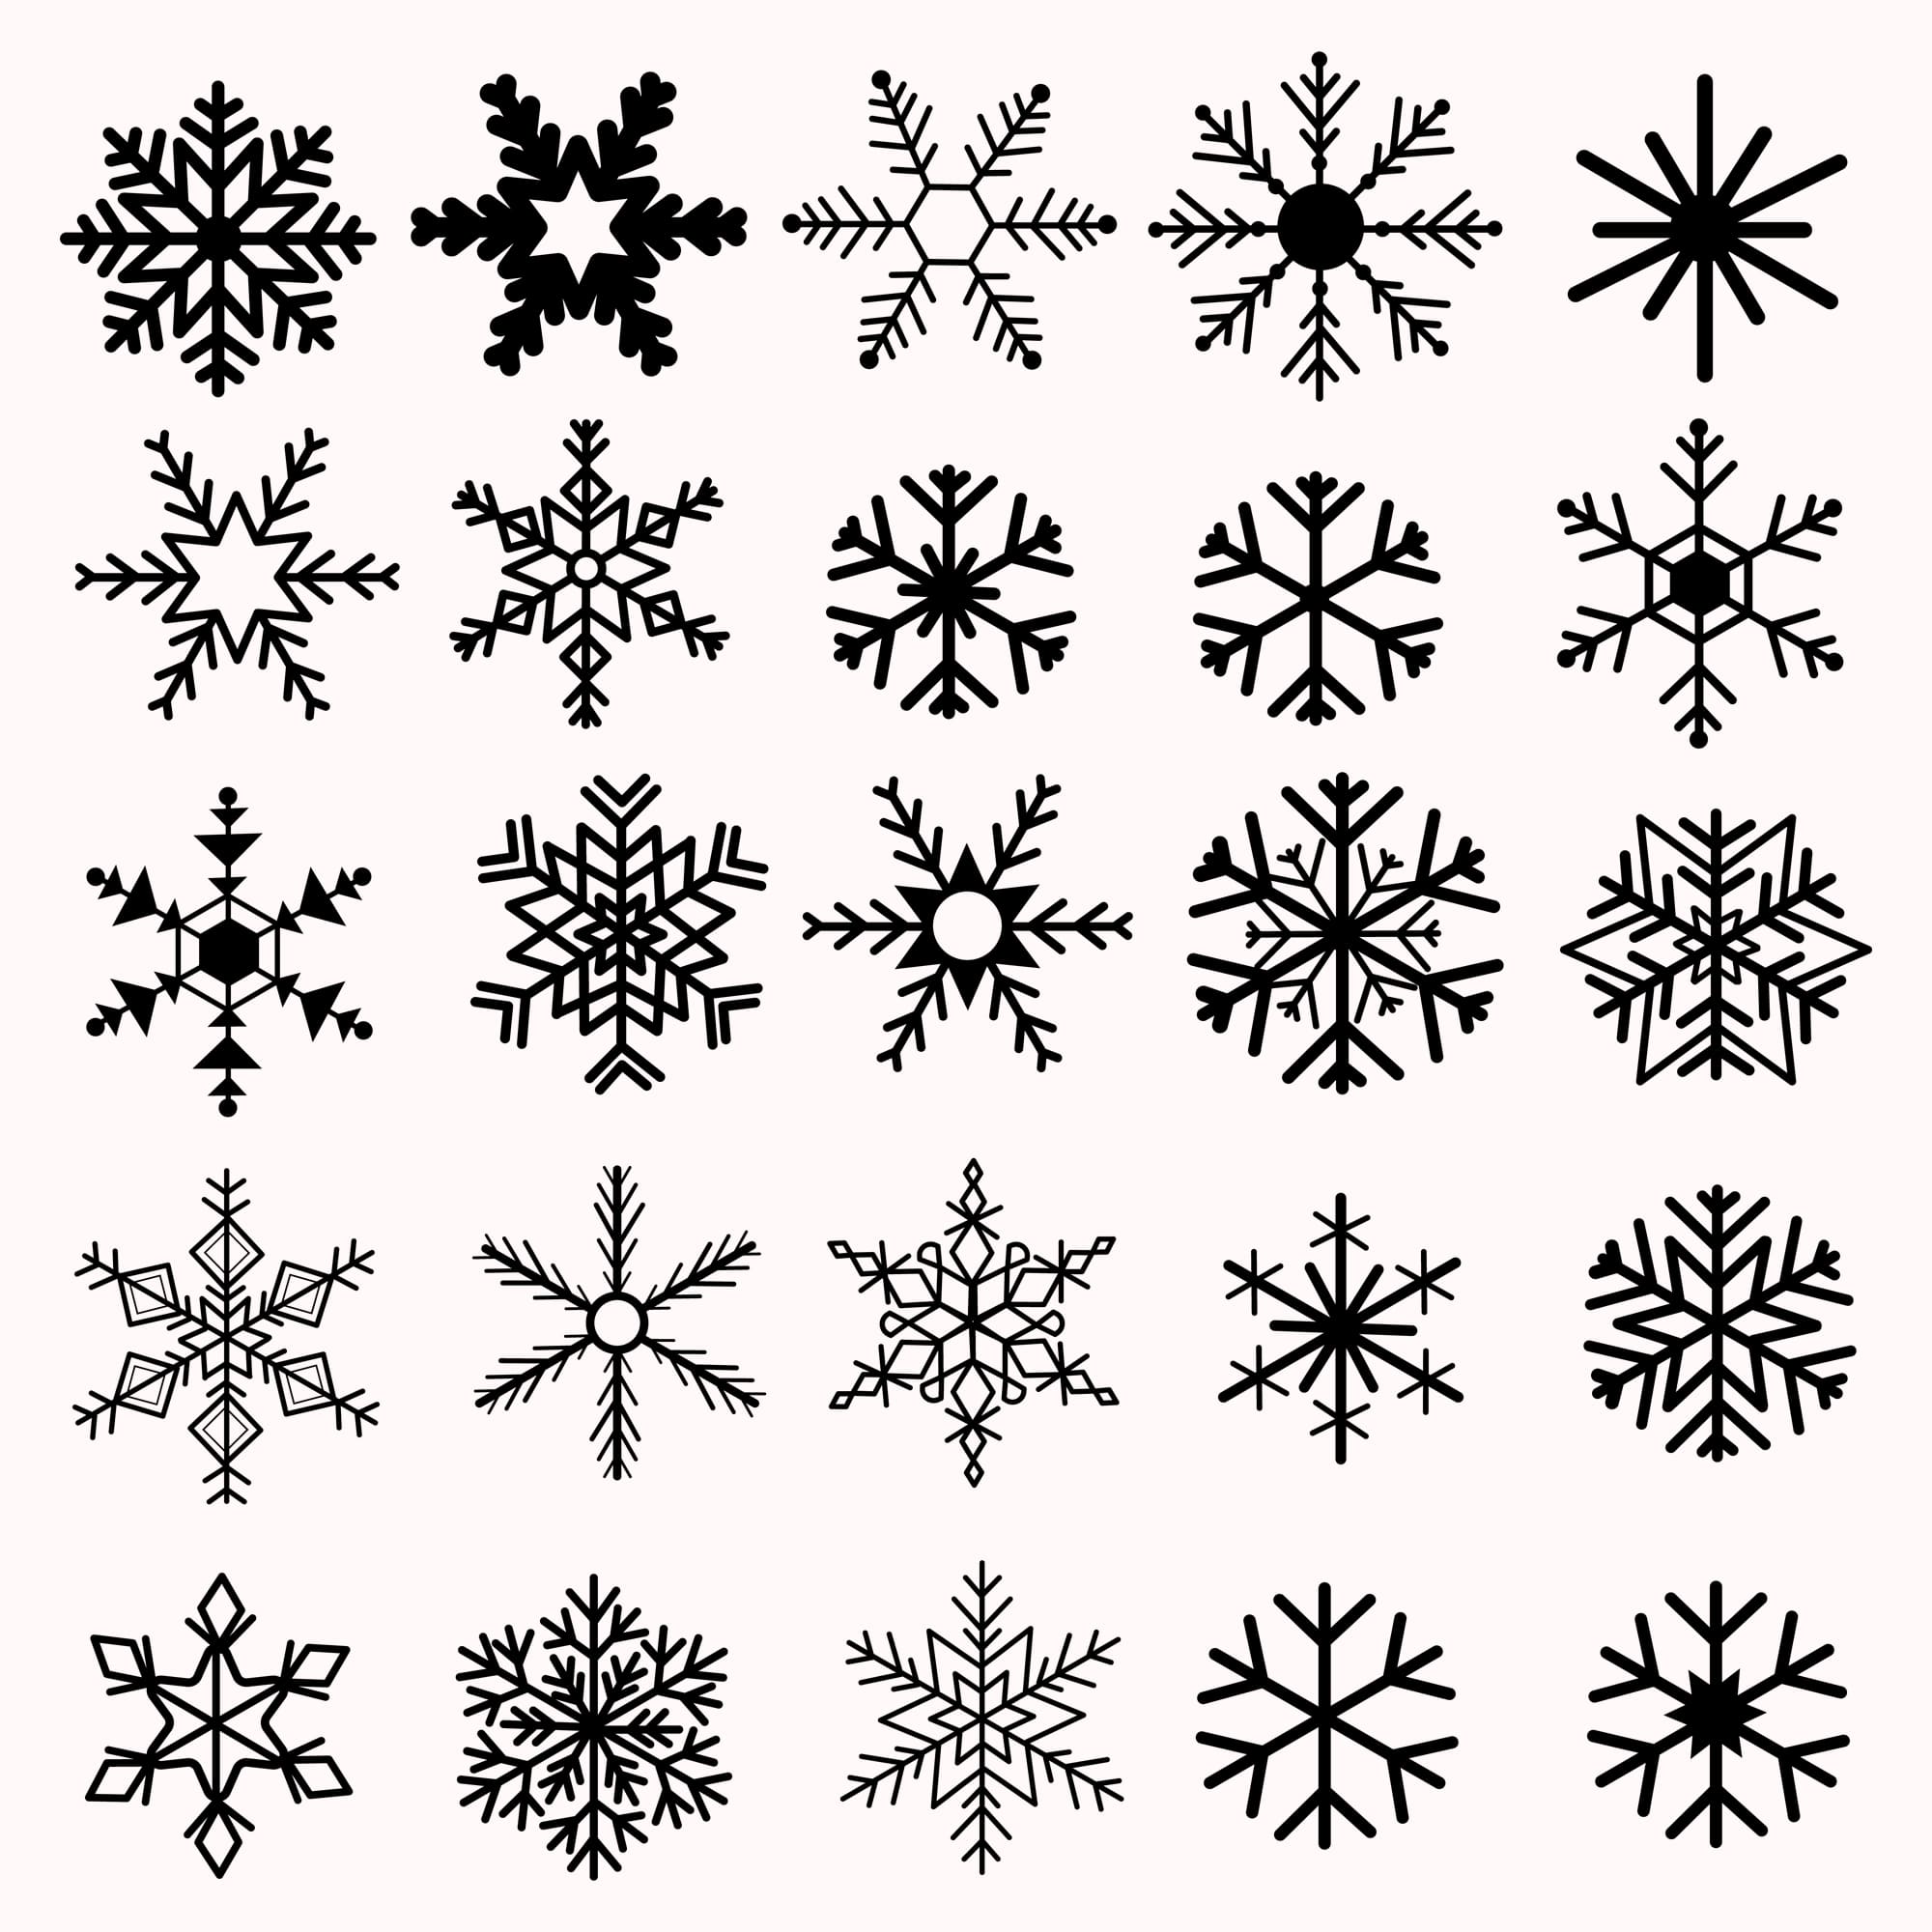 Snowflake svg elements in outlined style.